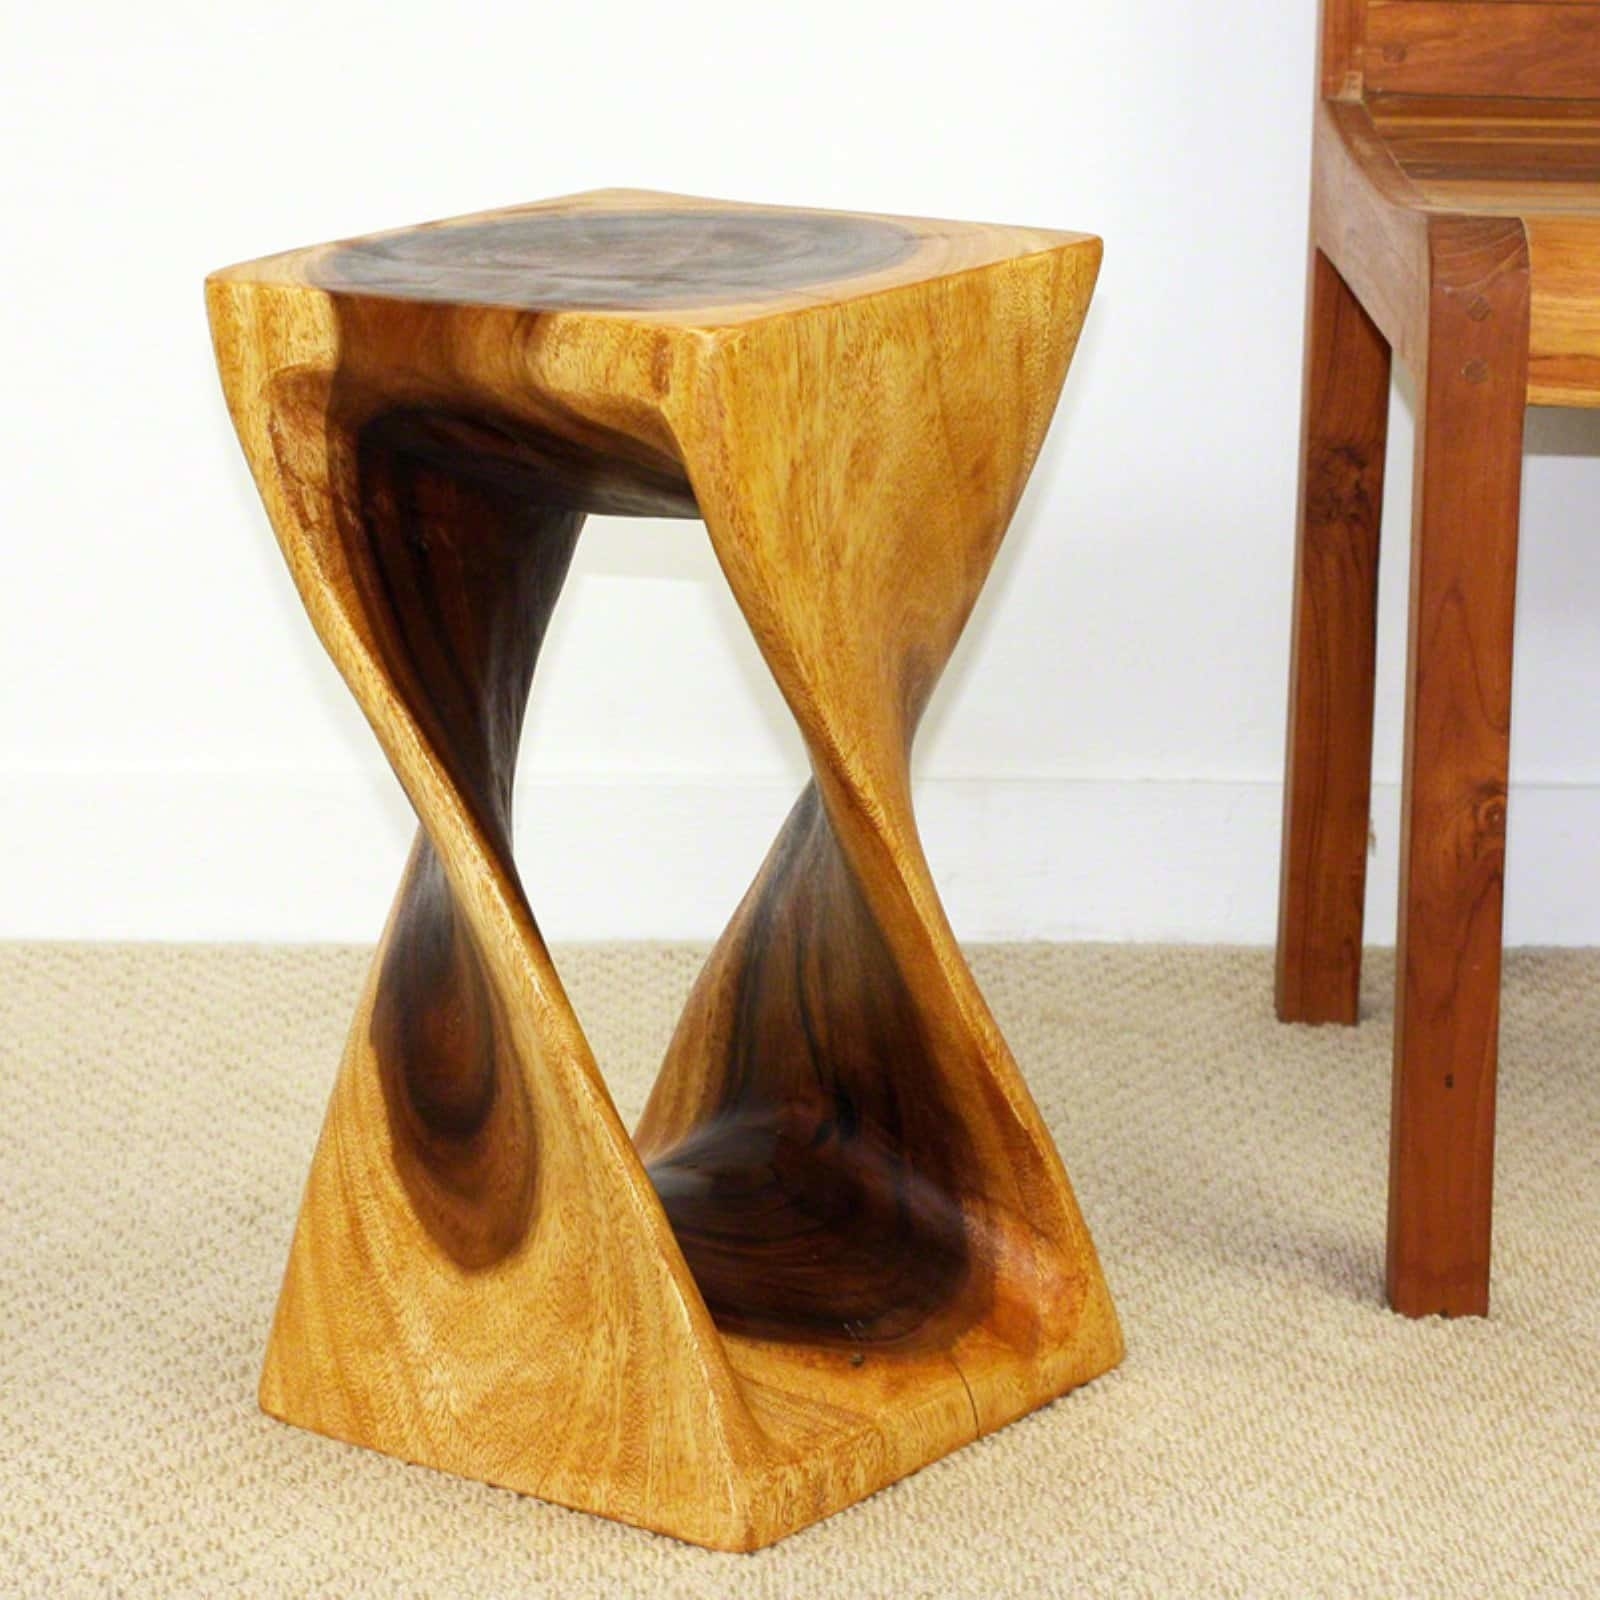 a wooden twisted stool